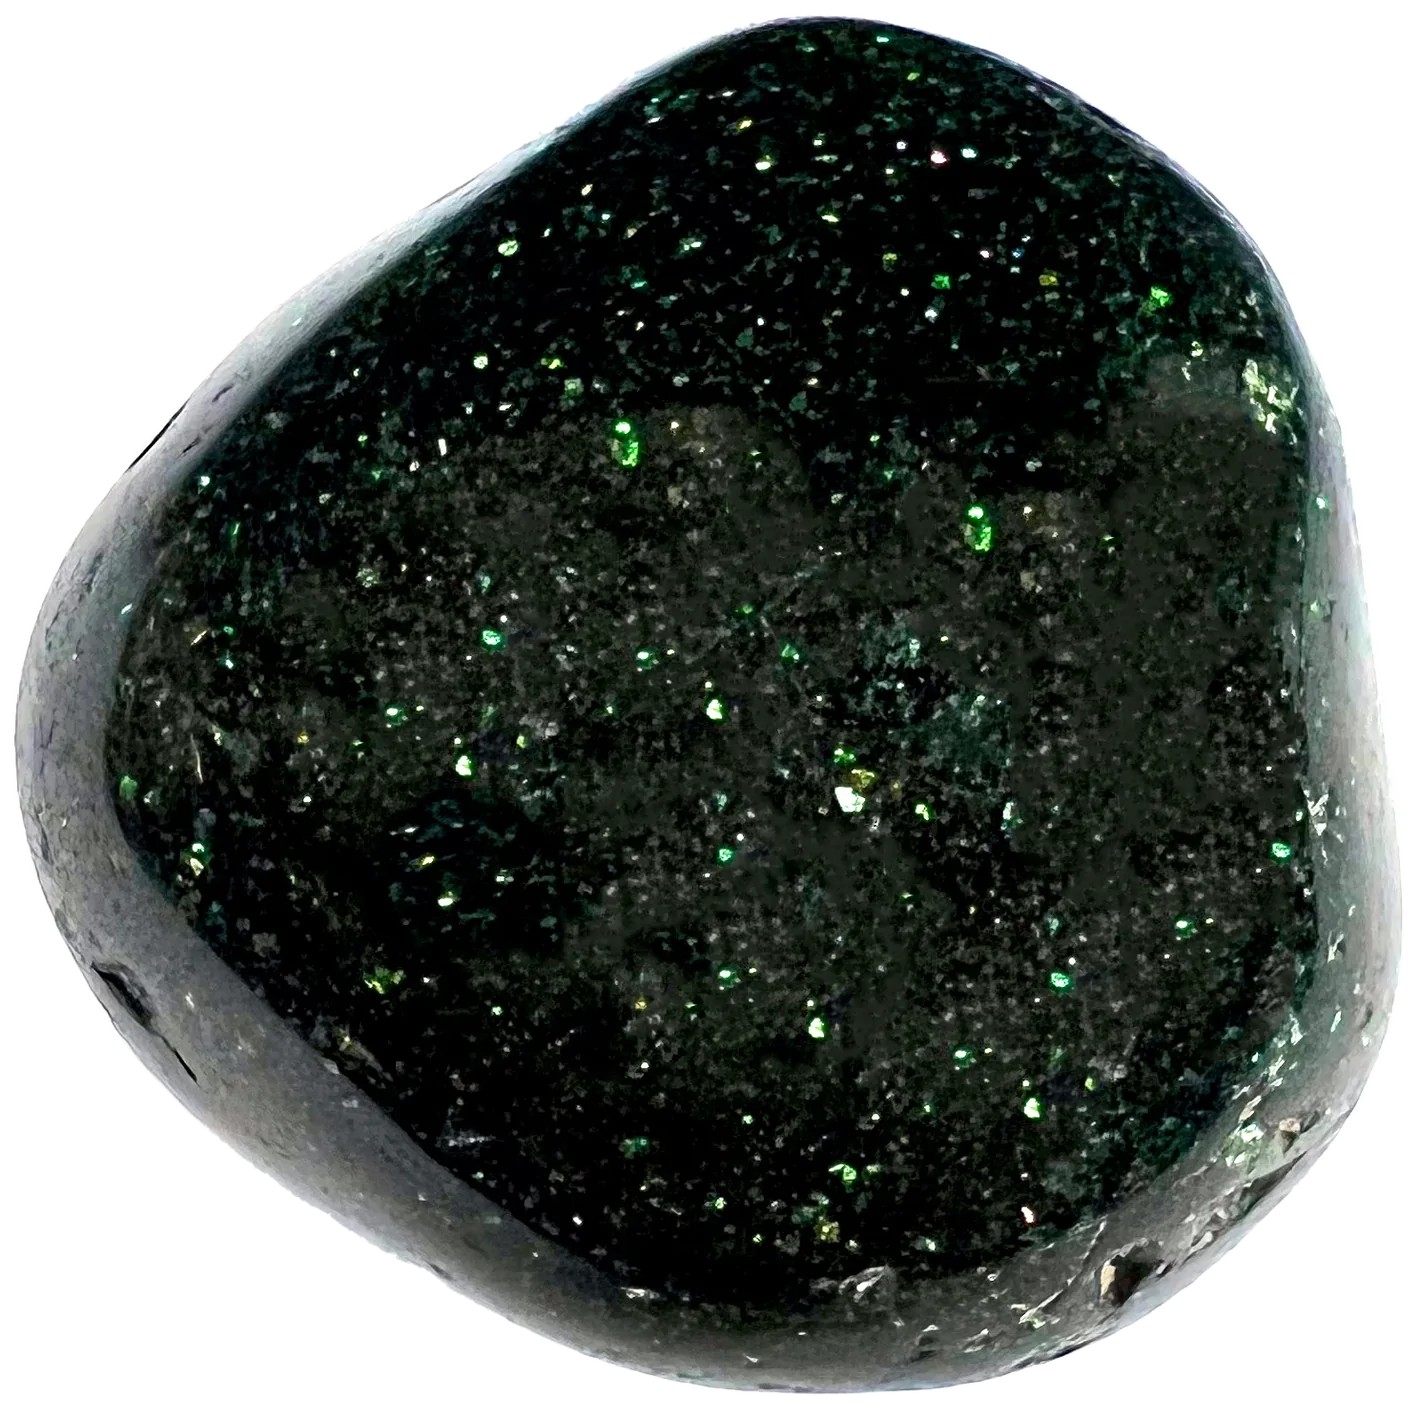 A tumble polished piece of green goldstone glass.  The stone is black with green sparkle flashes.